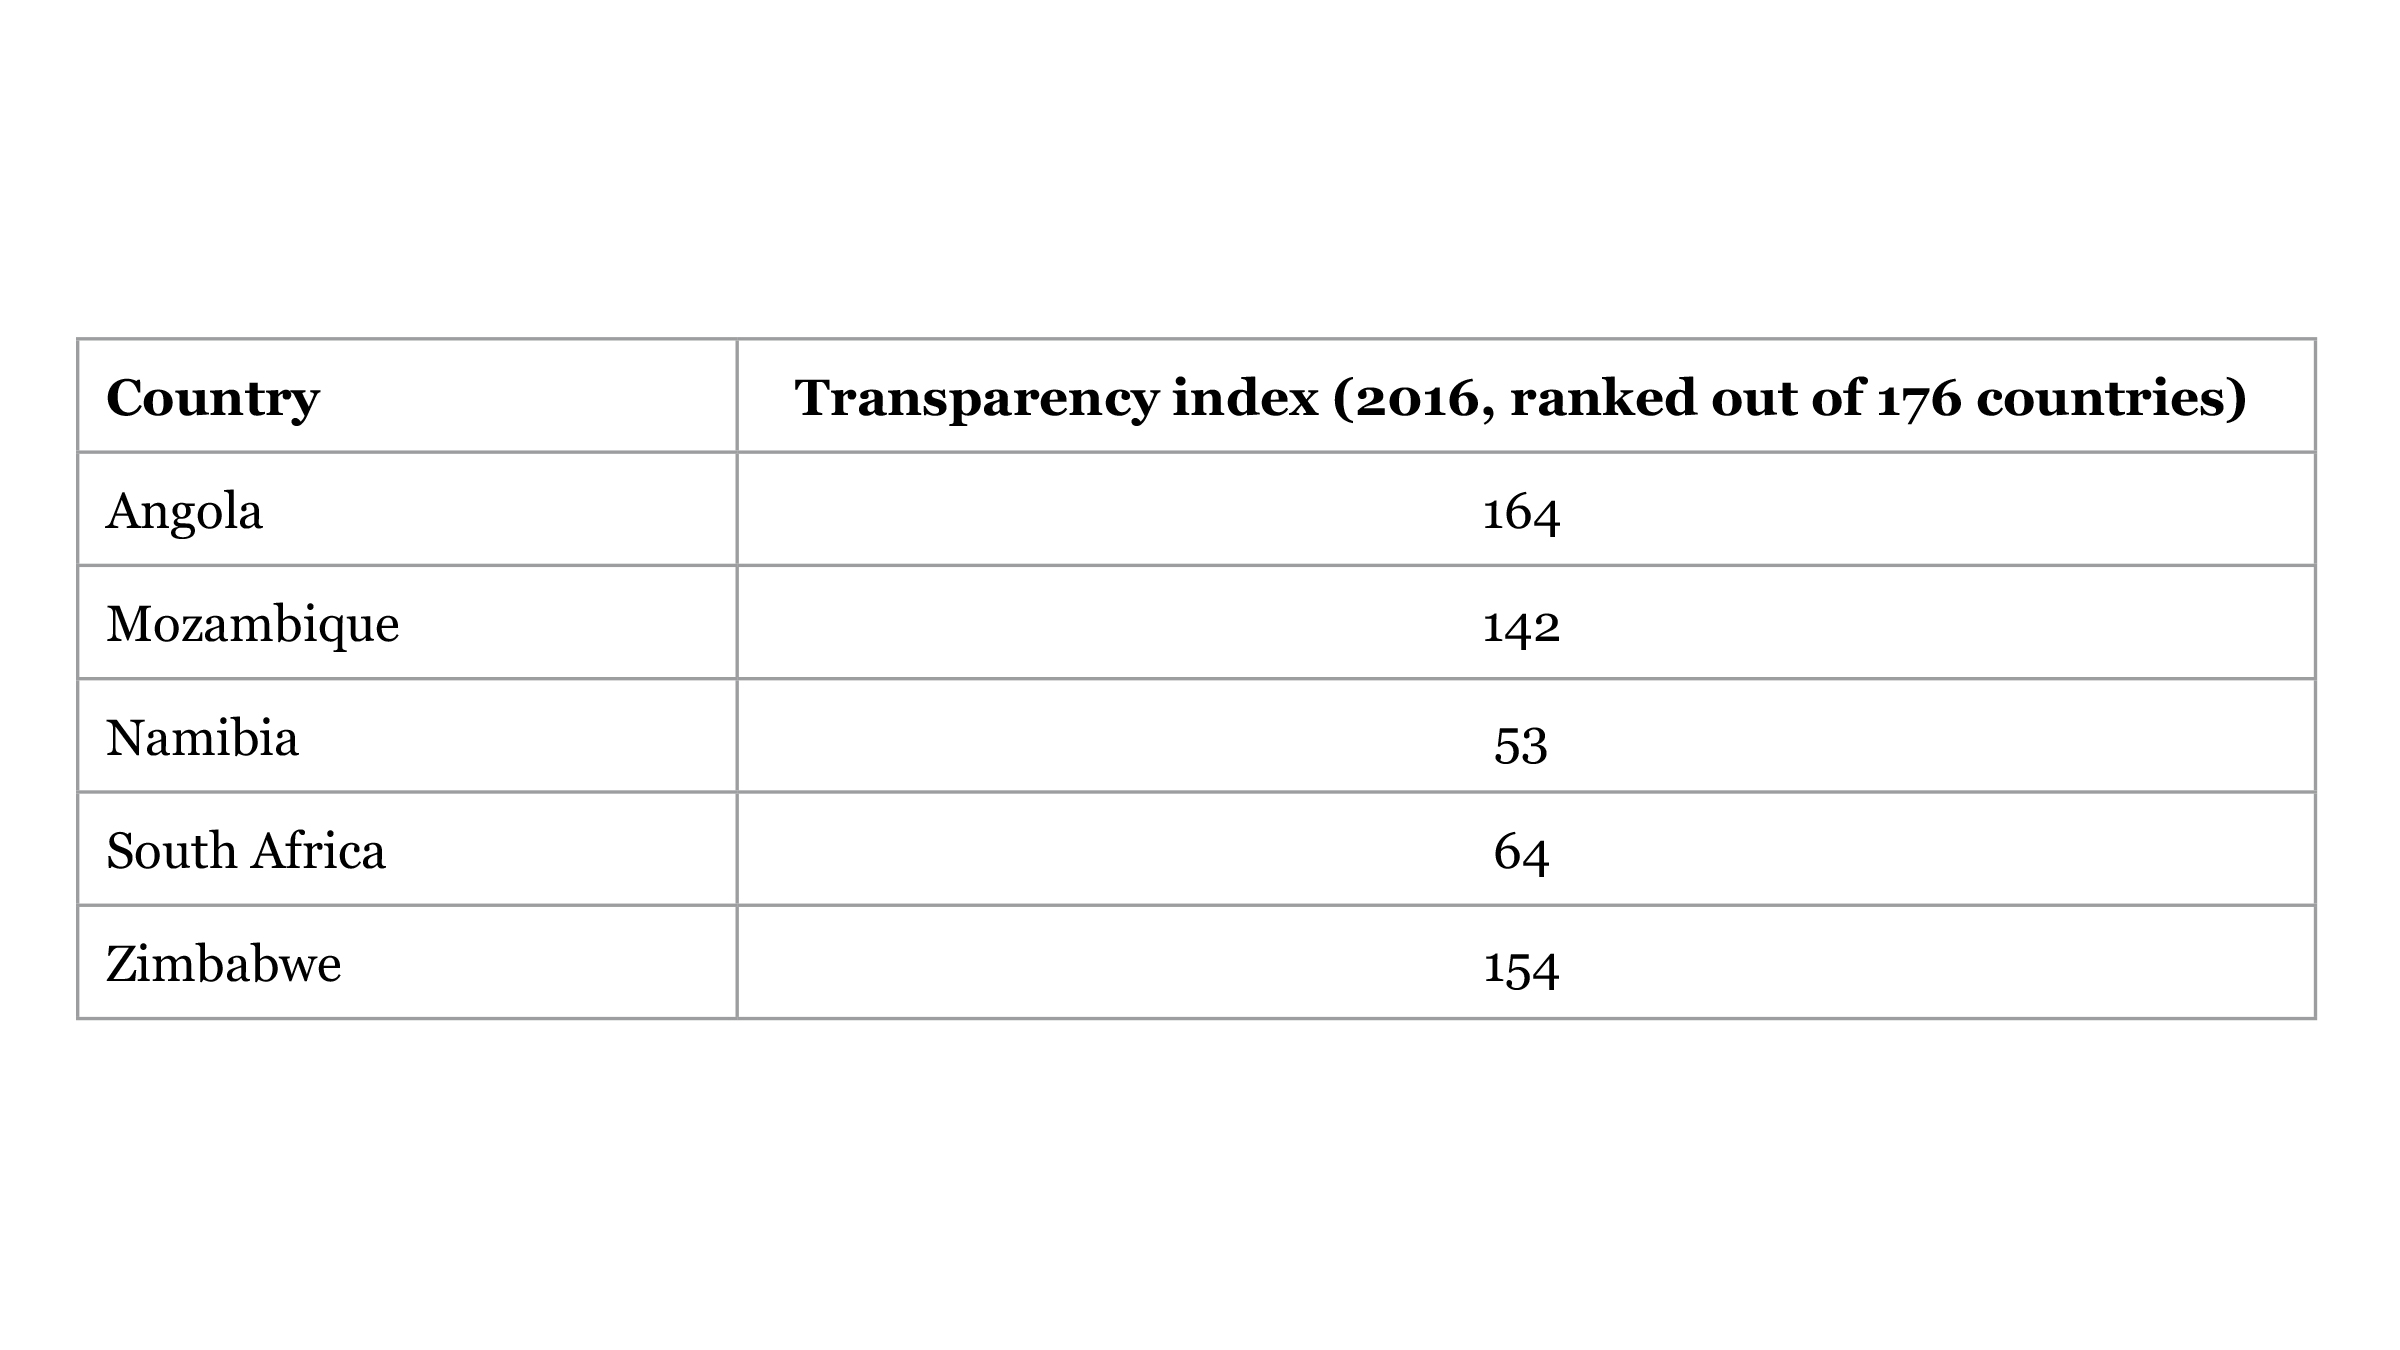 Table Transparency Levels in Southern Africa, 2016